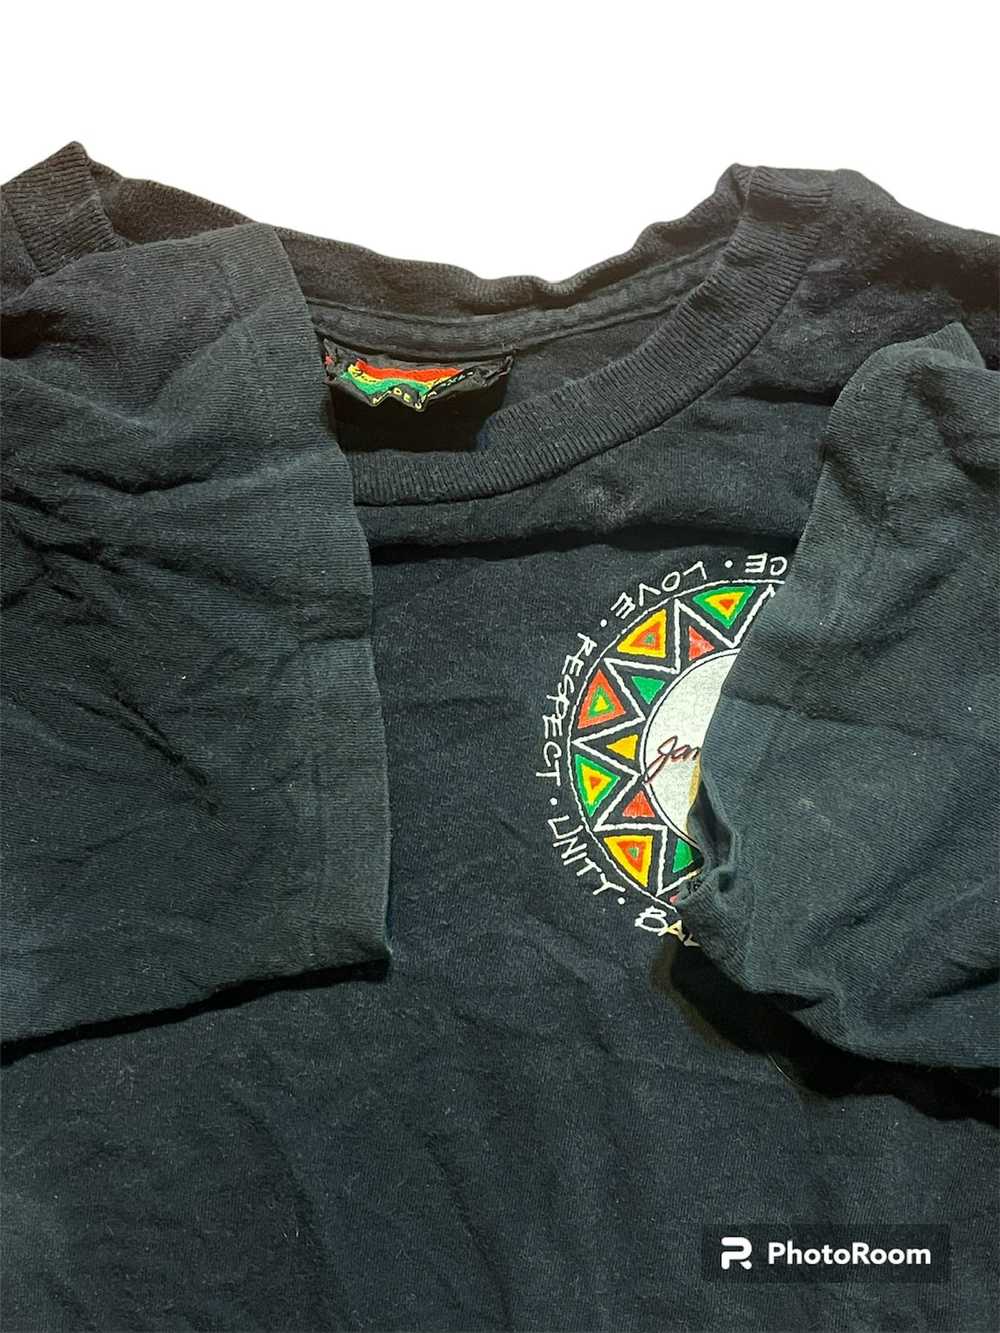 Vintage 1990s Jamaican style t shirt. - image 9